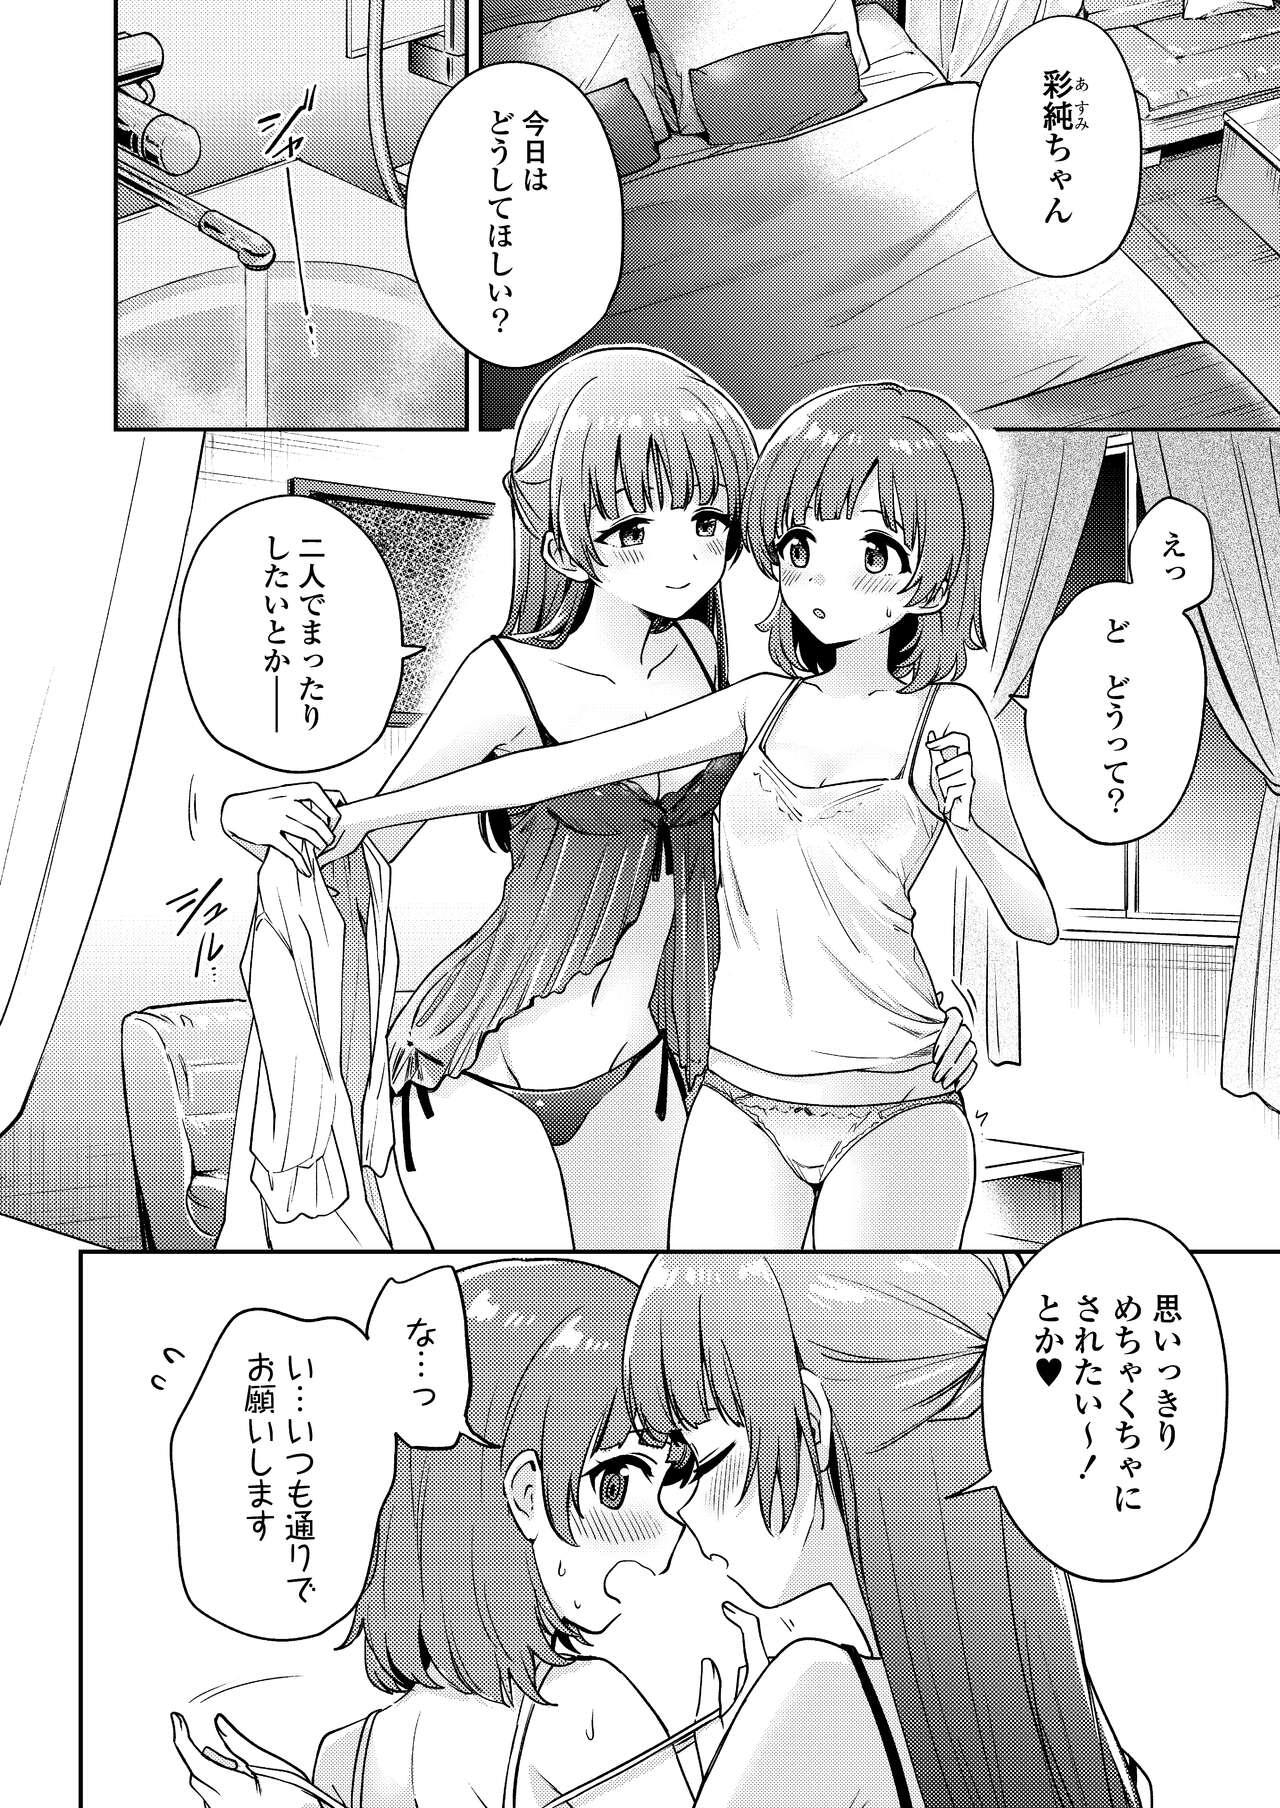 Asumi-chan Is Interested In Lesbian Brothels! 2